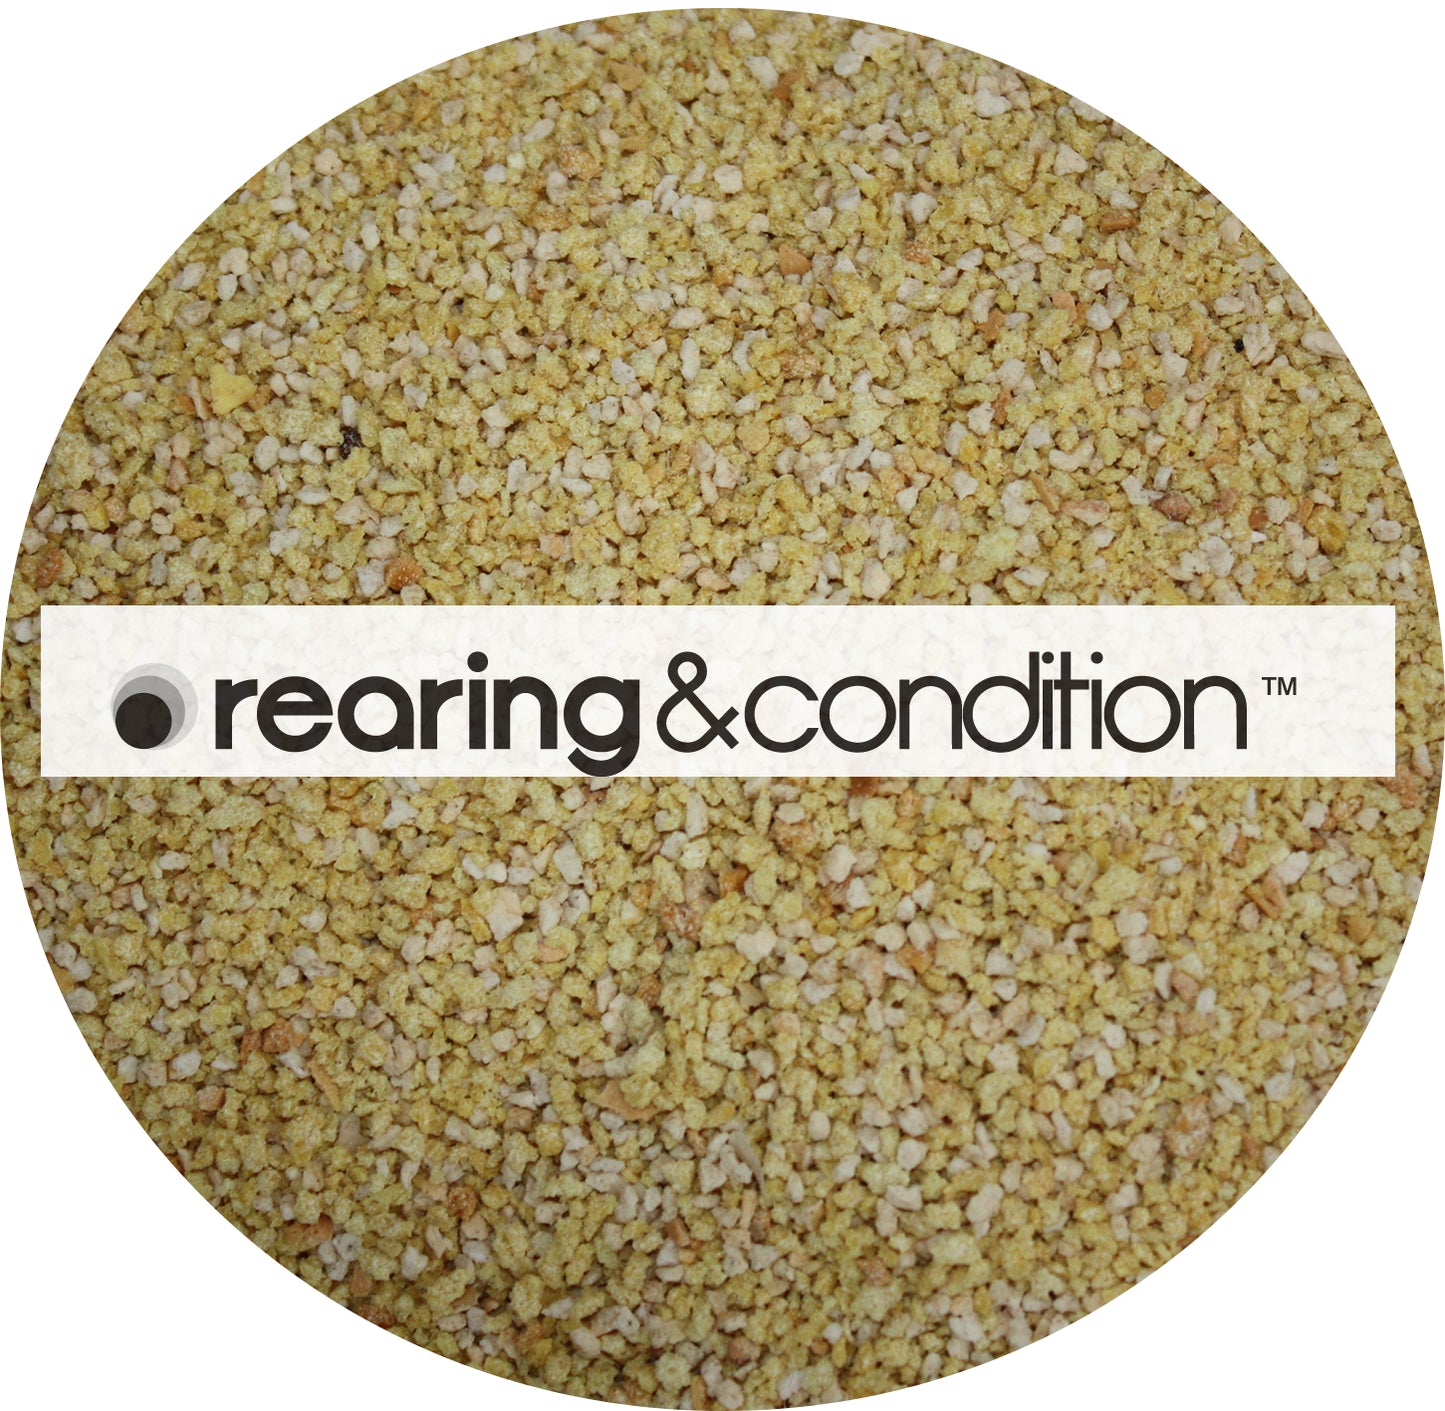 Rearing & Condition Food